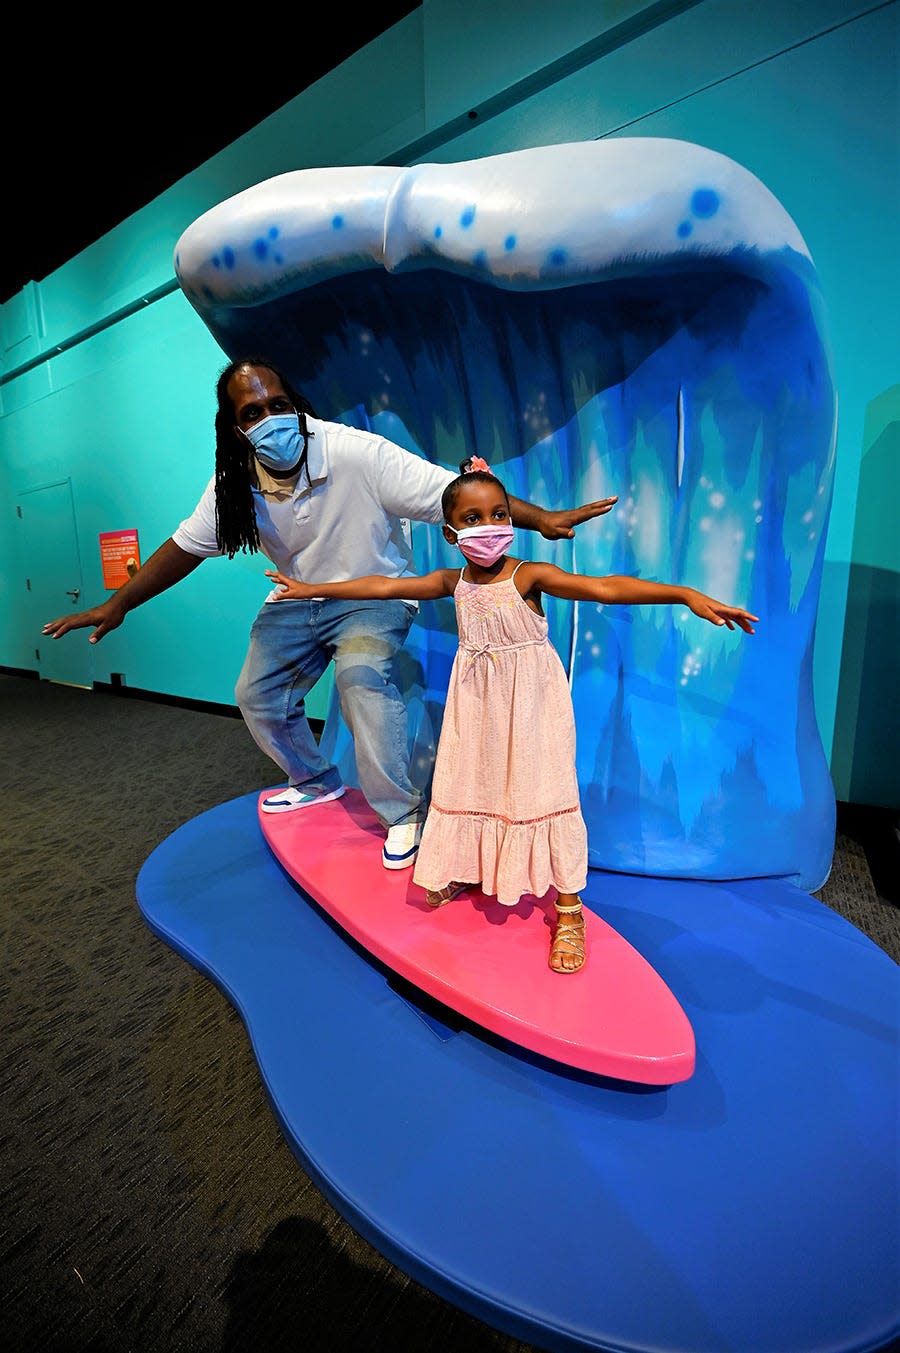 Visitors can hang ten and learn what it's like to be a pro surfer as part of "Barbie You Can Be Anything: The Experience," an exhibit opening at COSI on Oct. 4,